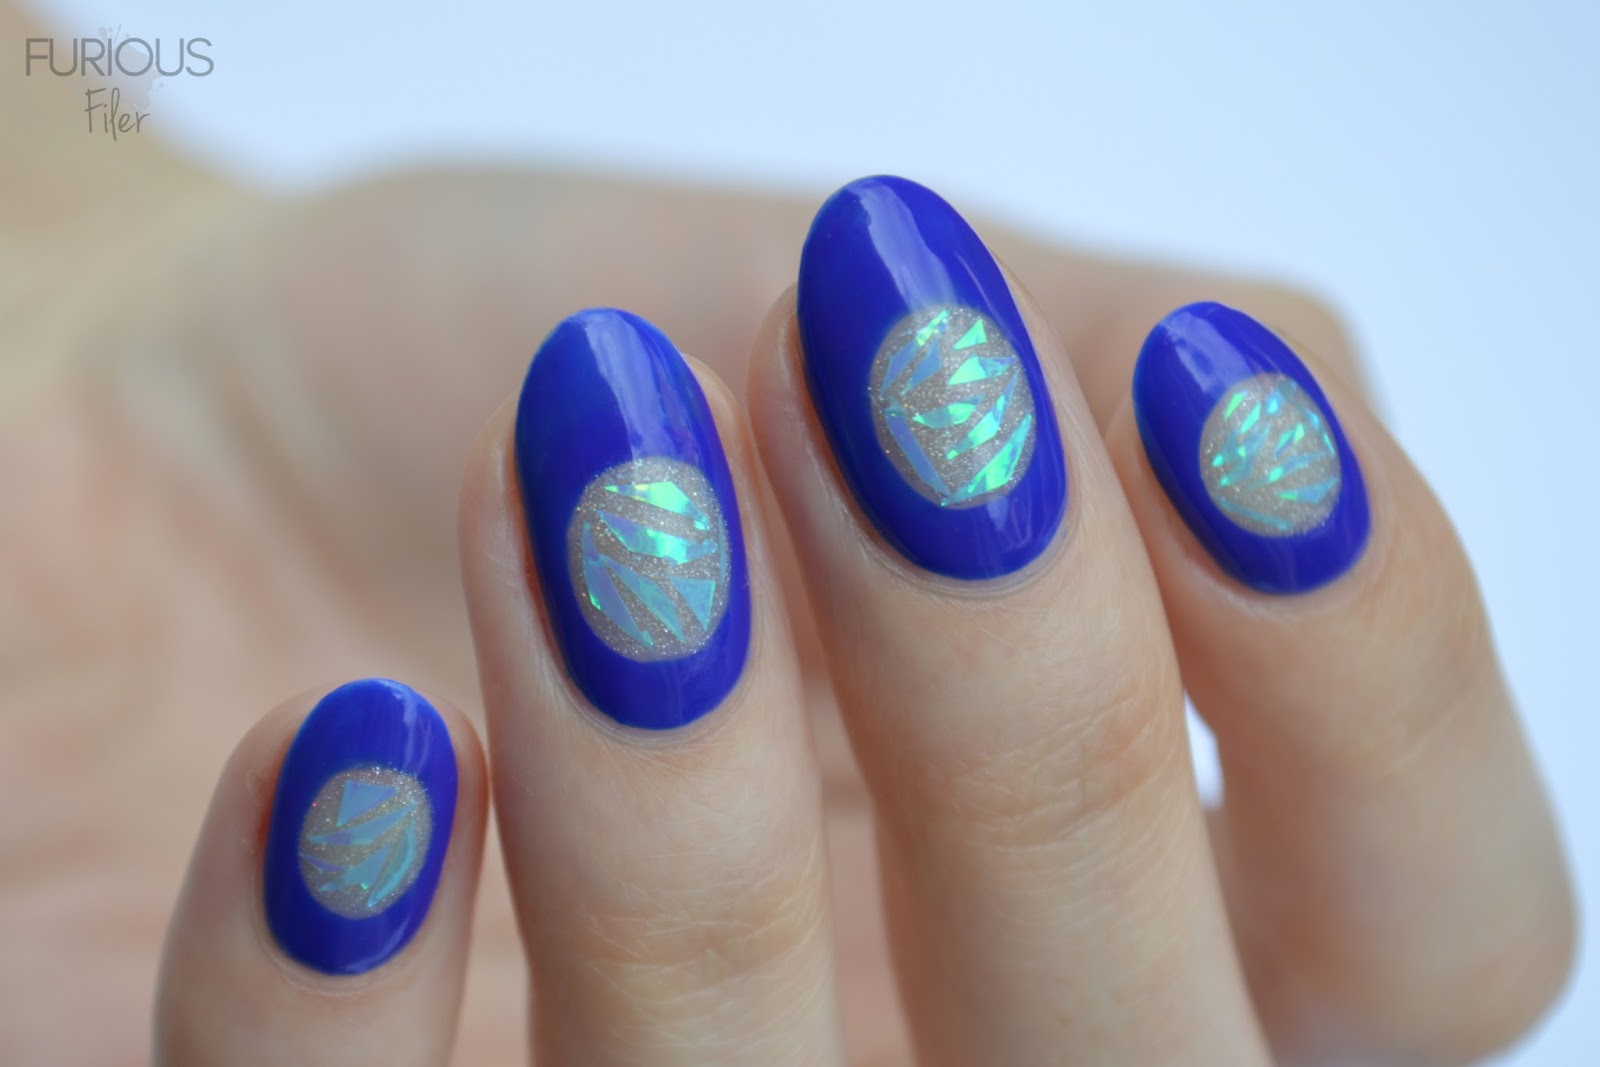 shattered glass cellophane holographic furious filer nail art